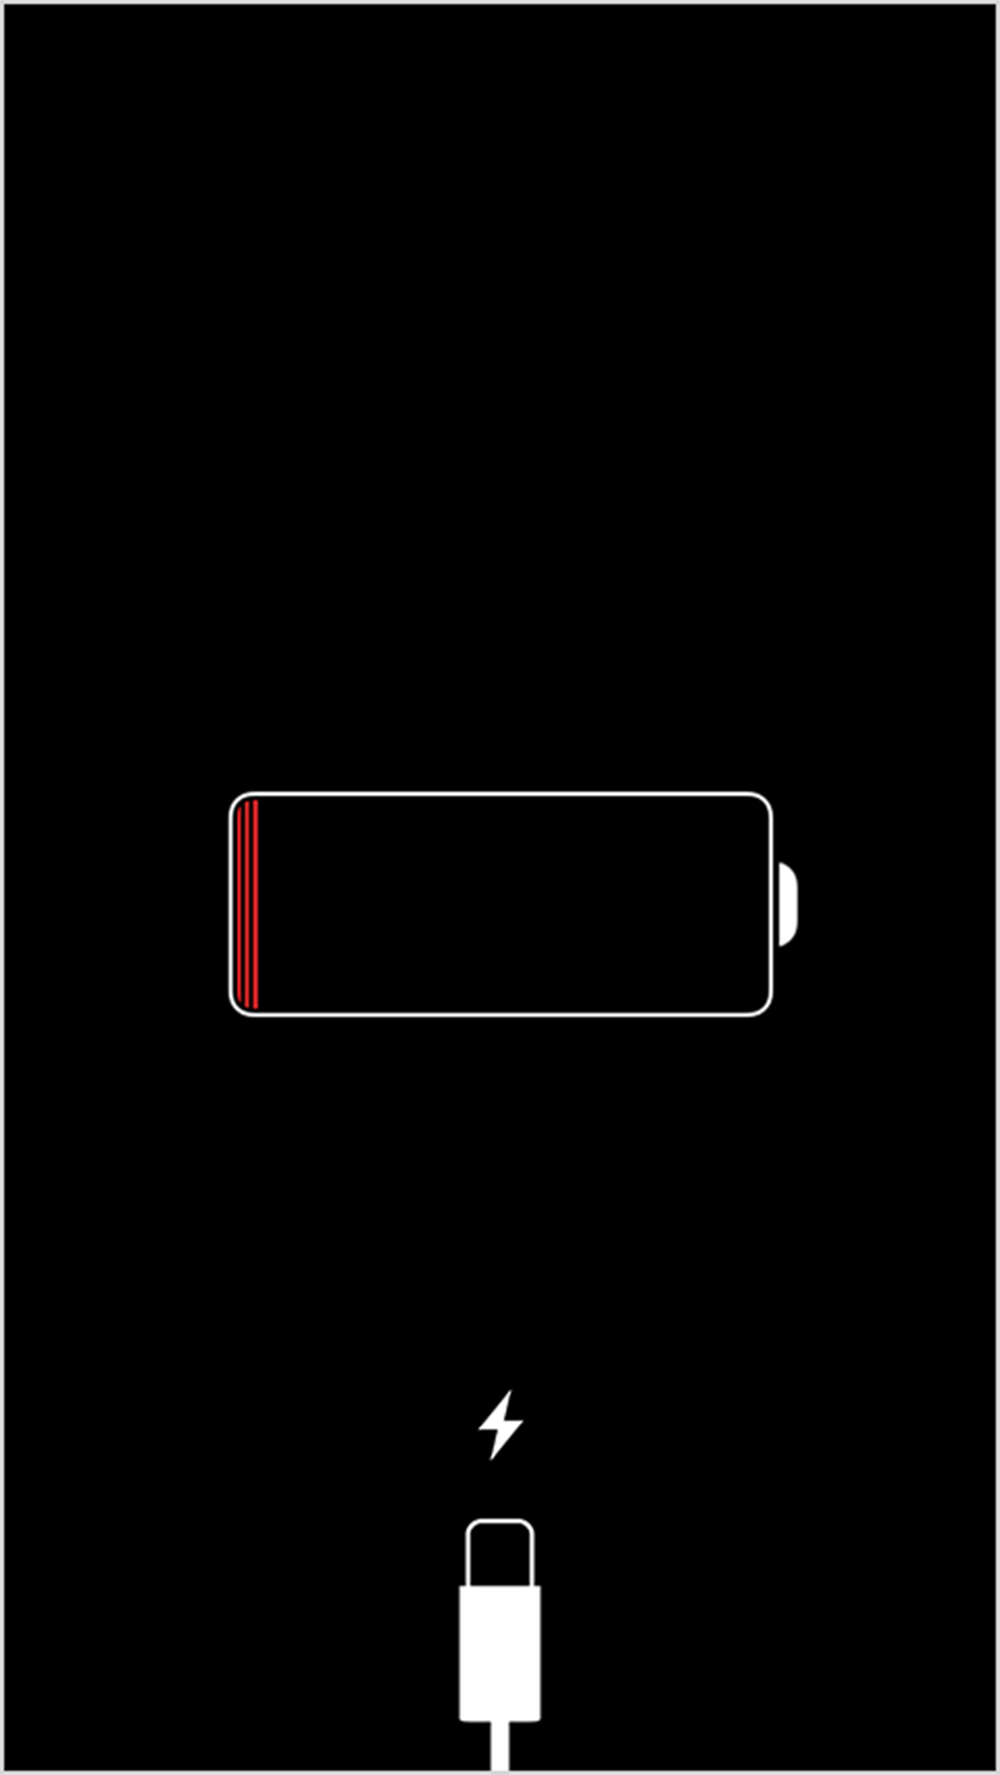 1445347217-ios-low-battery.png